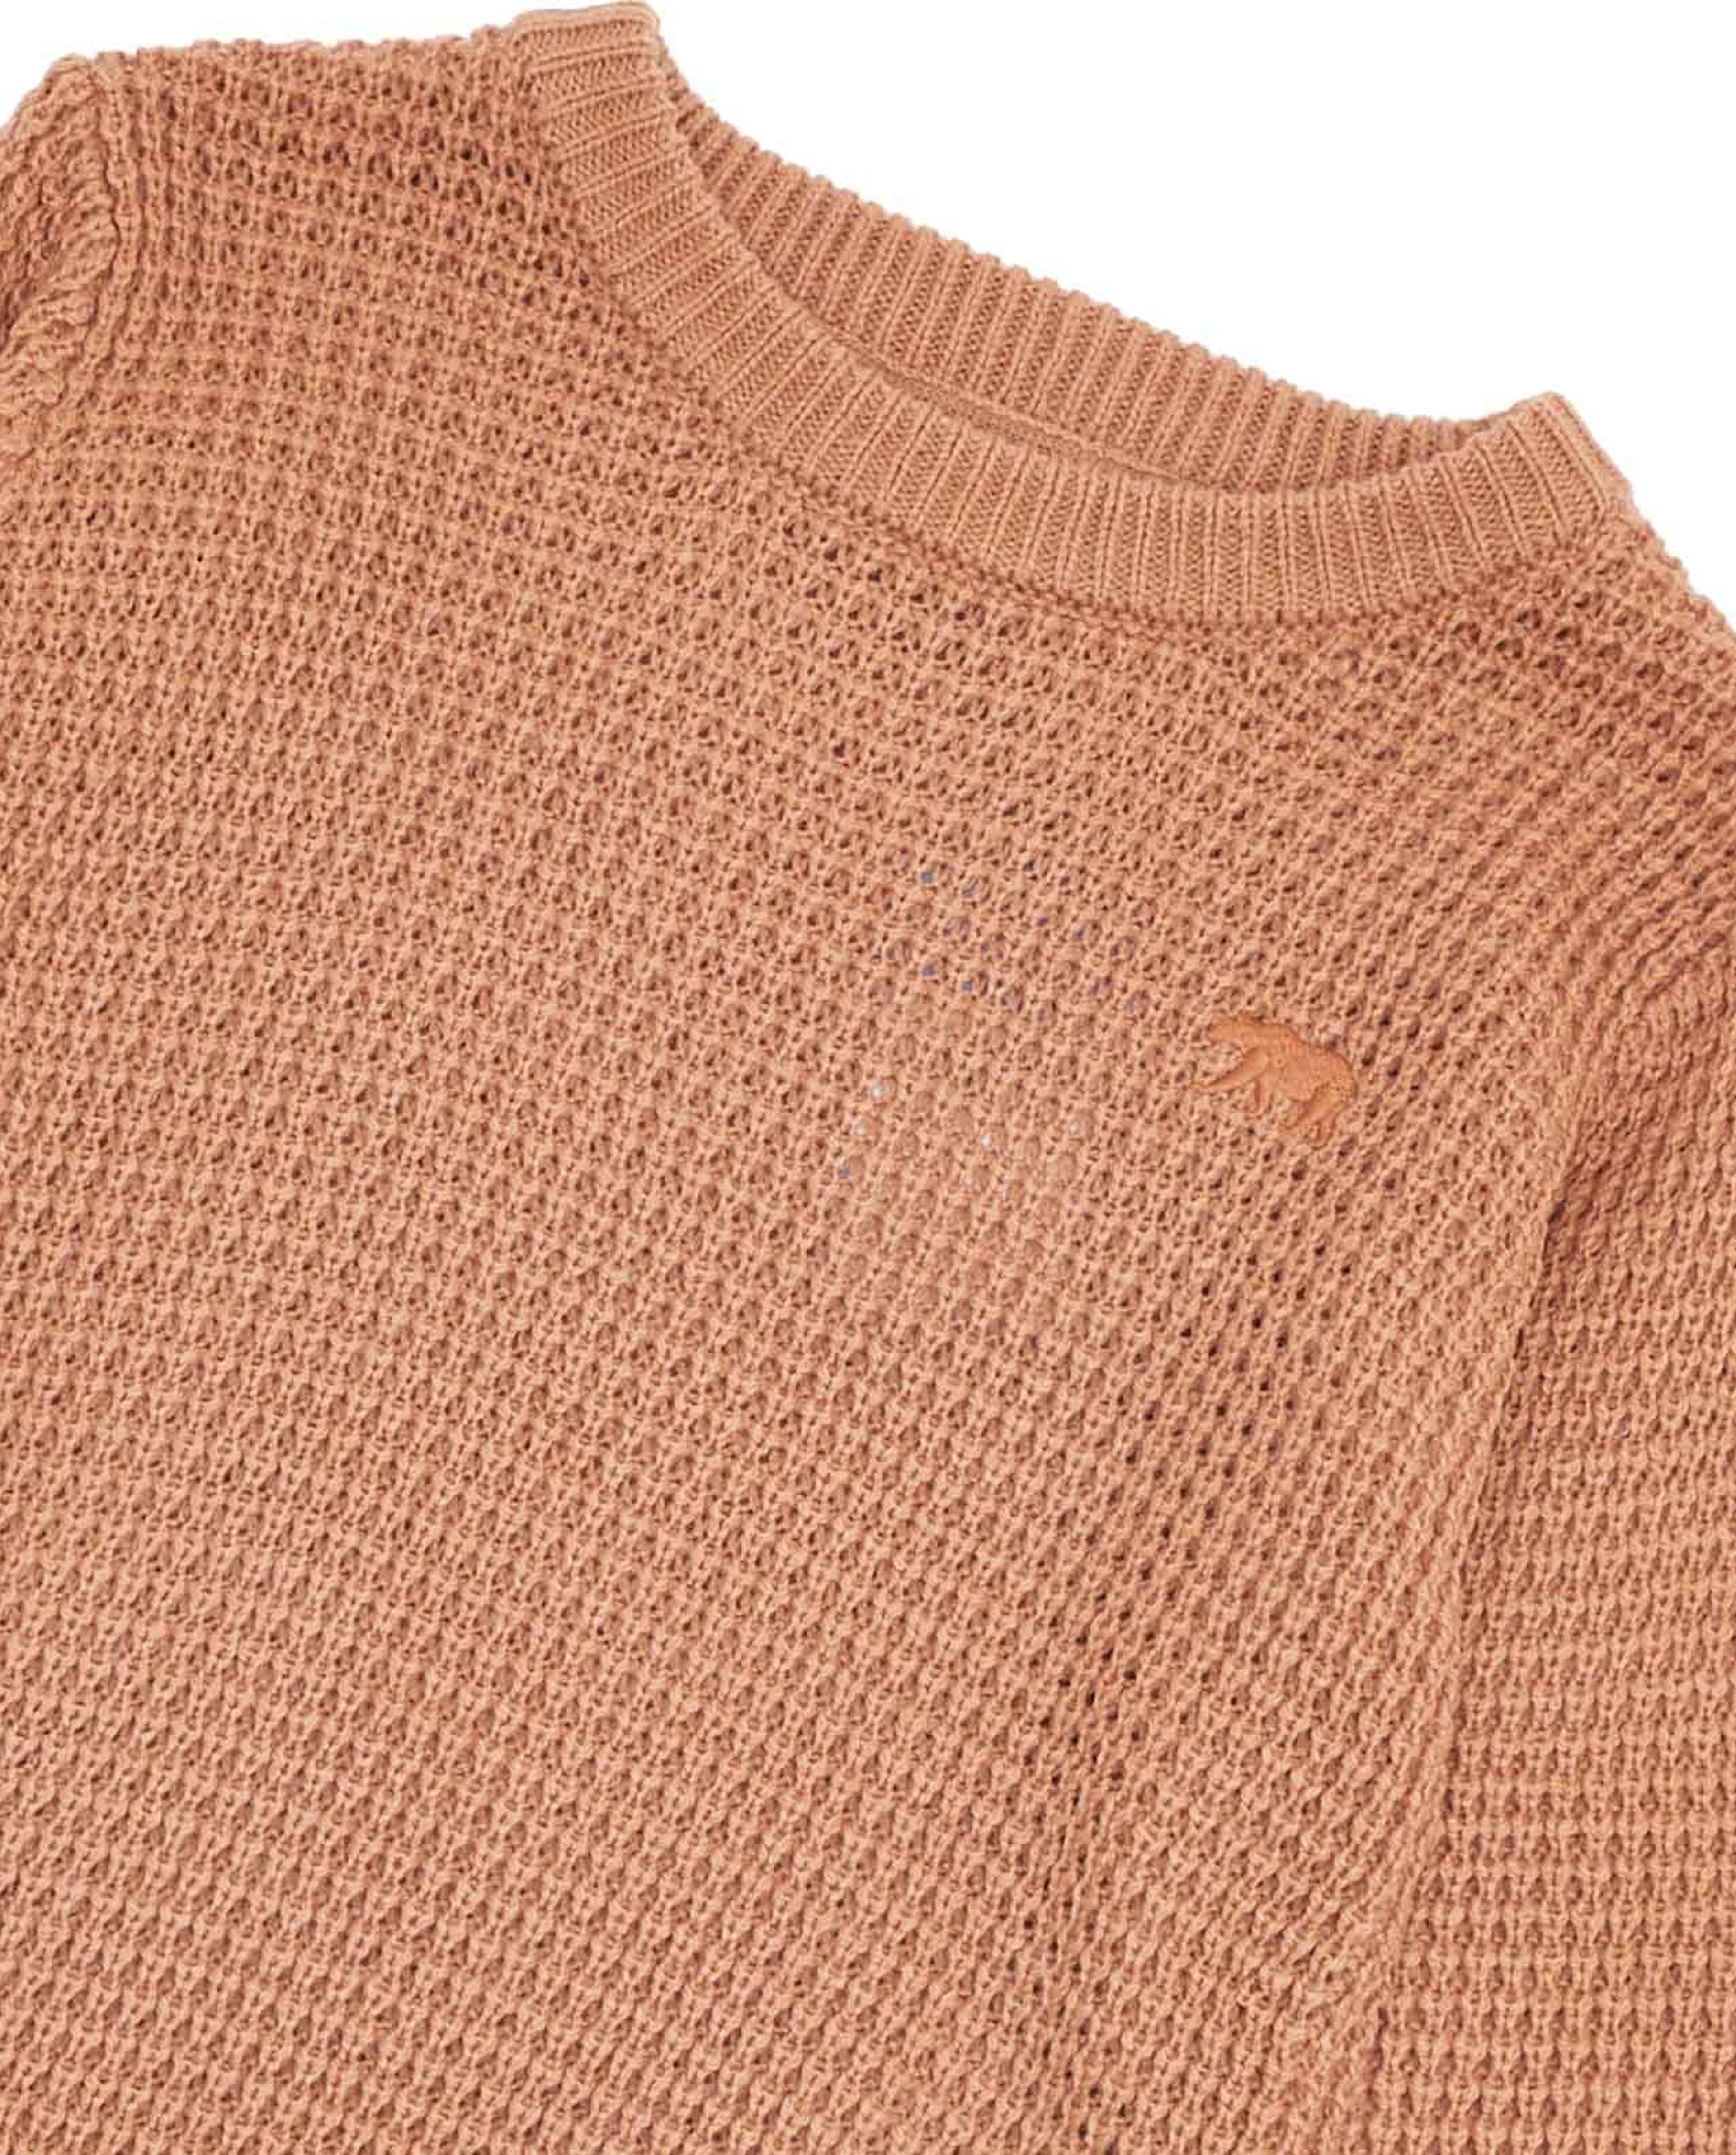 Waffle Textured Sweater with Long Sleeves